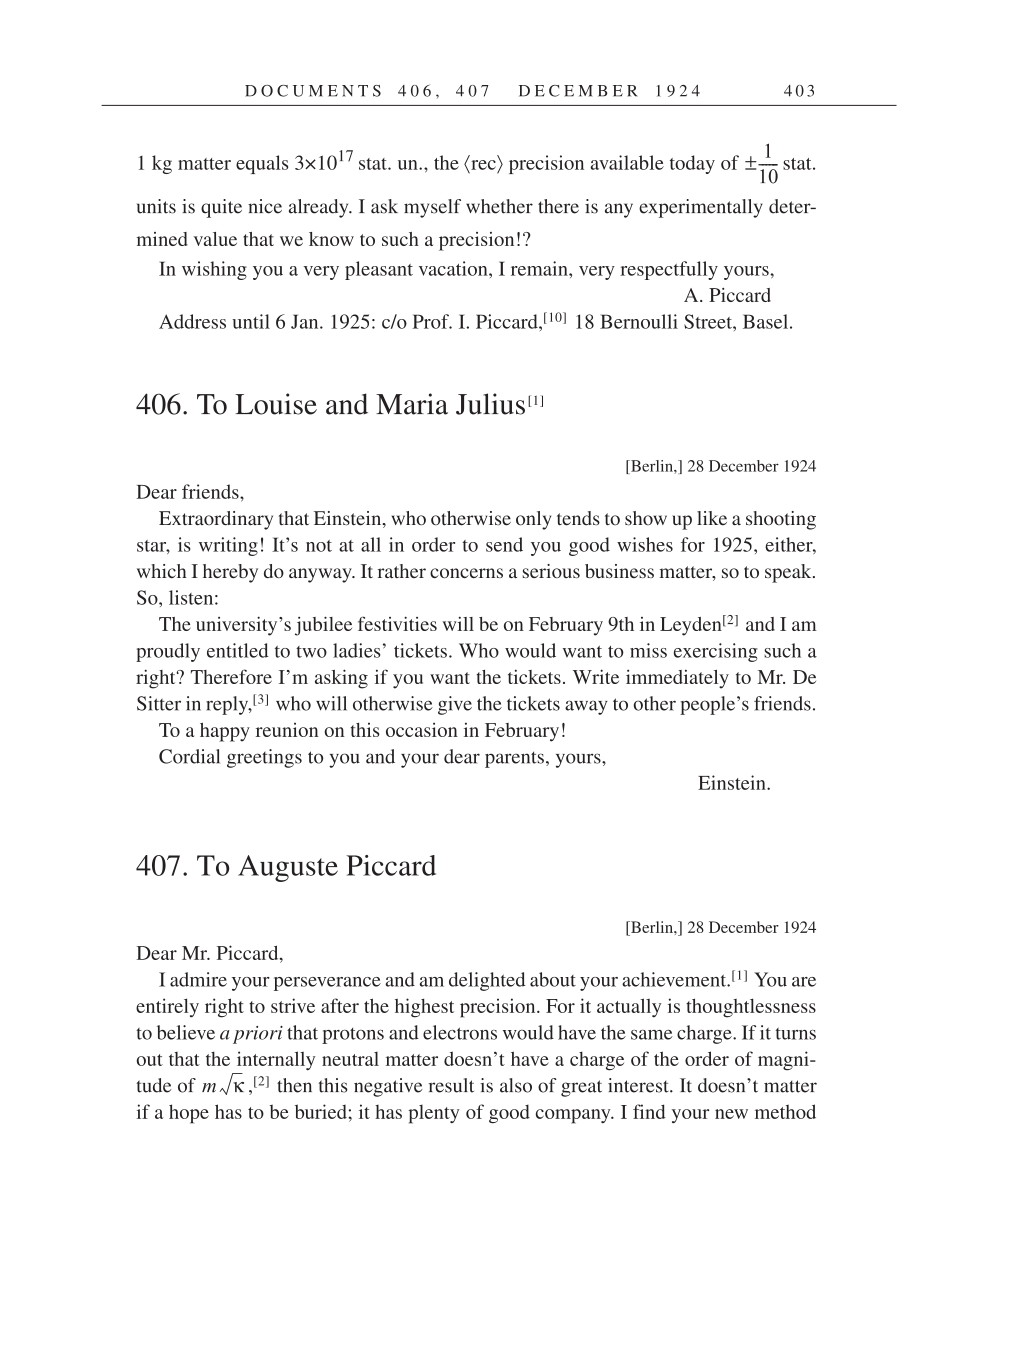 Volume 14: The Berlin Years: Writings & Correspondence, April 1923-May 1925 (English Translation Supplement) page 403